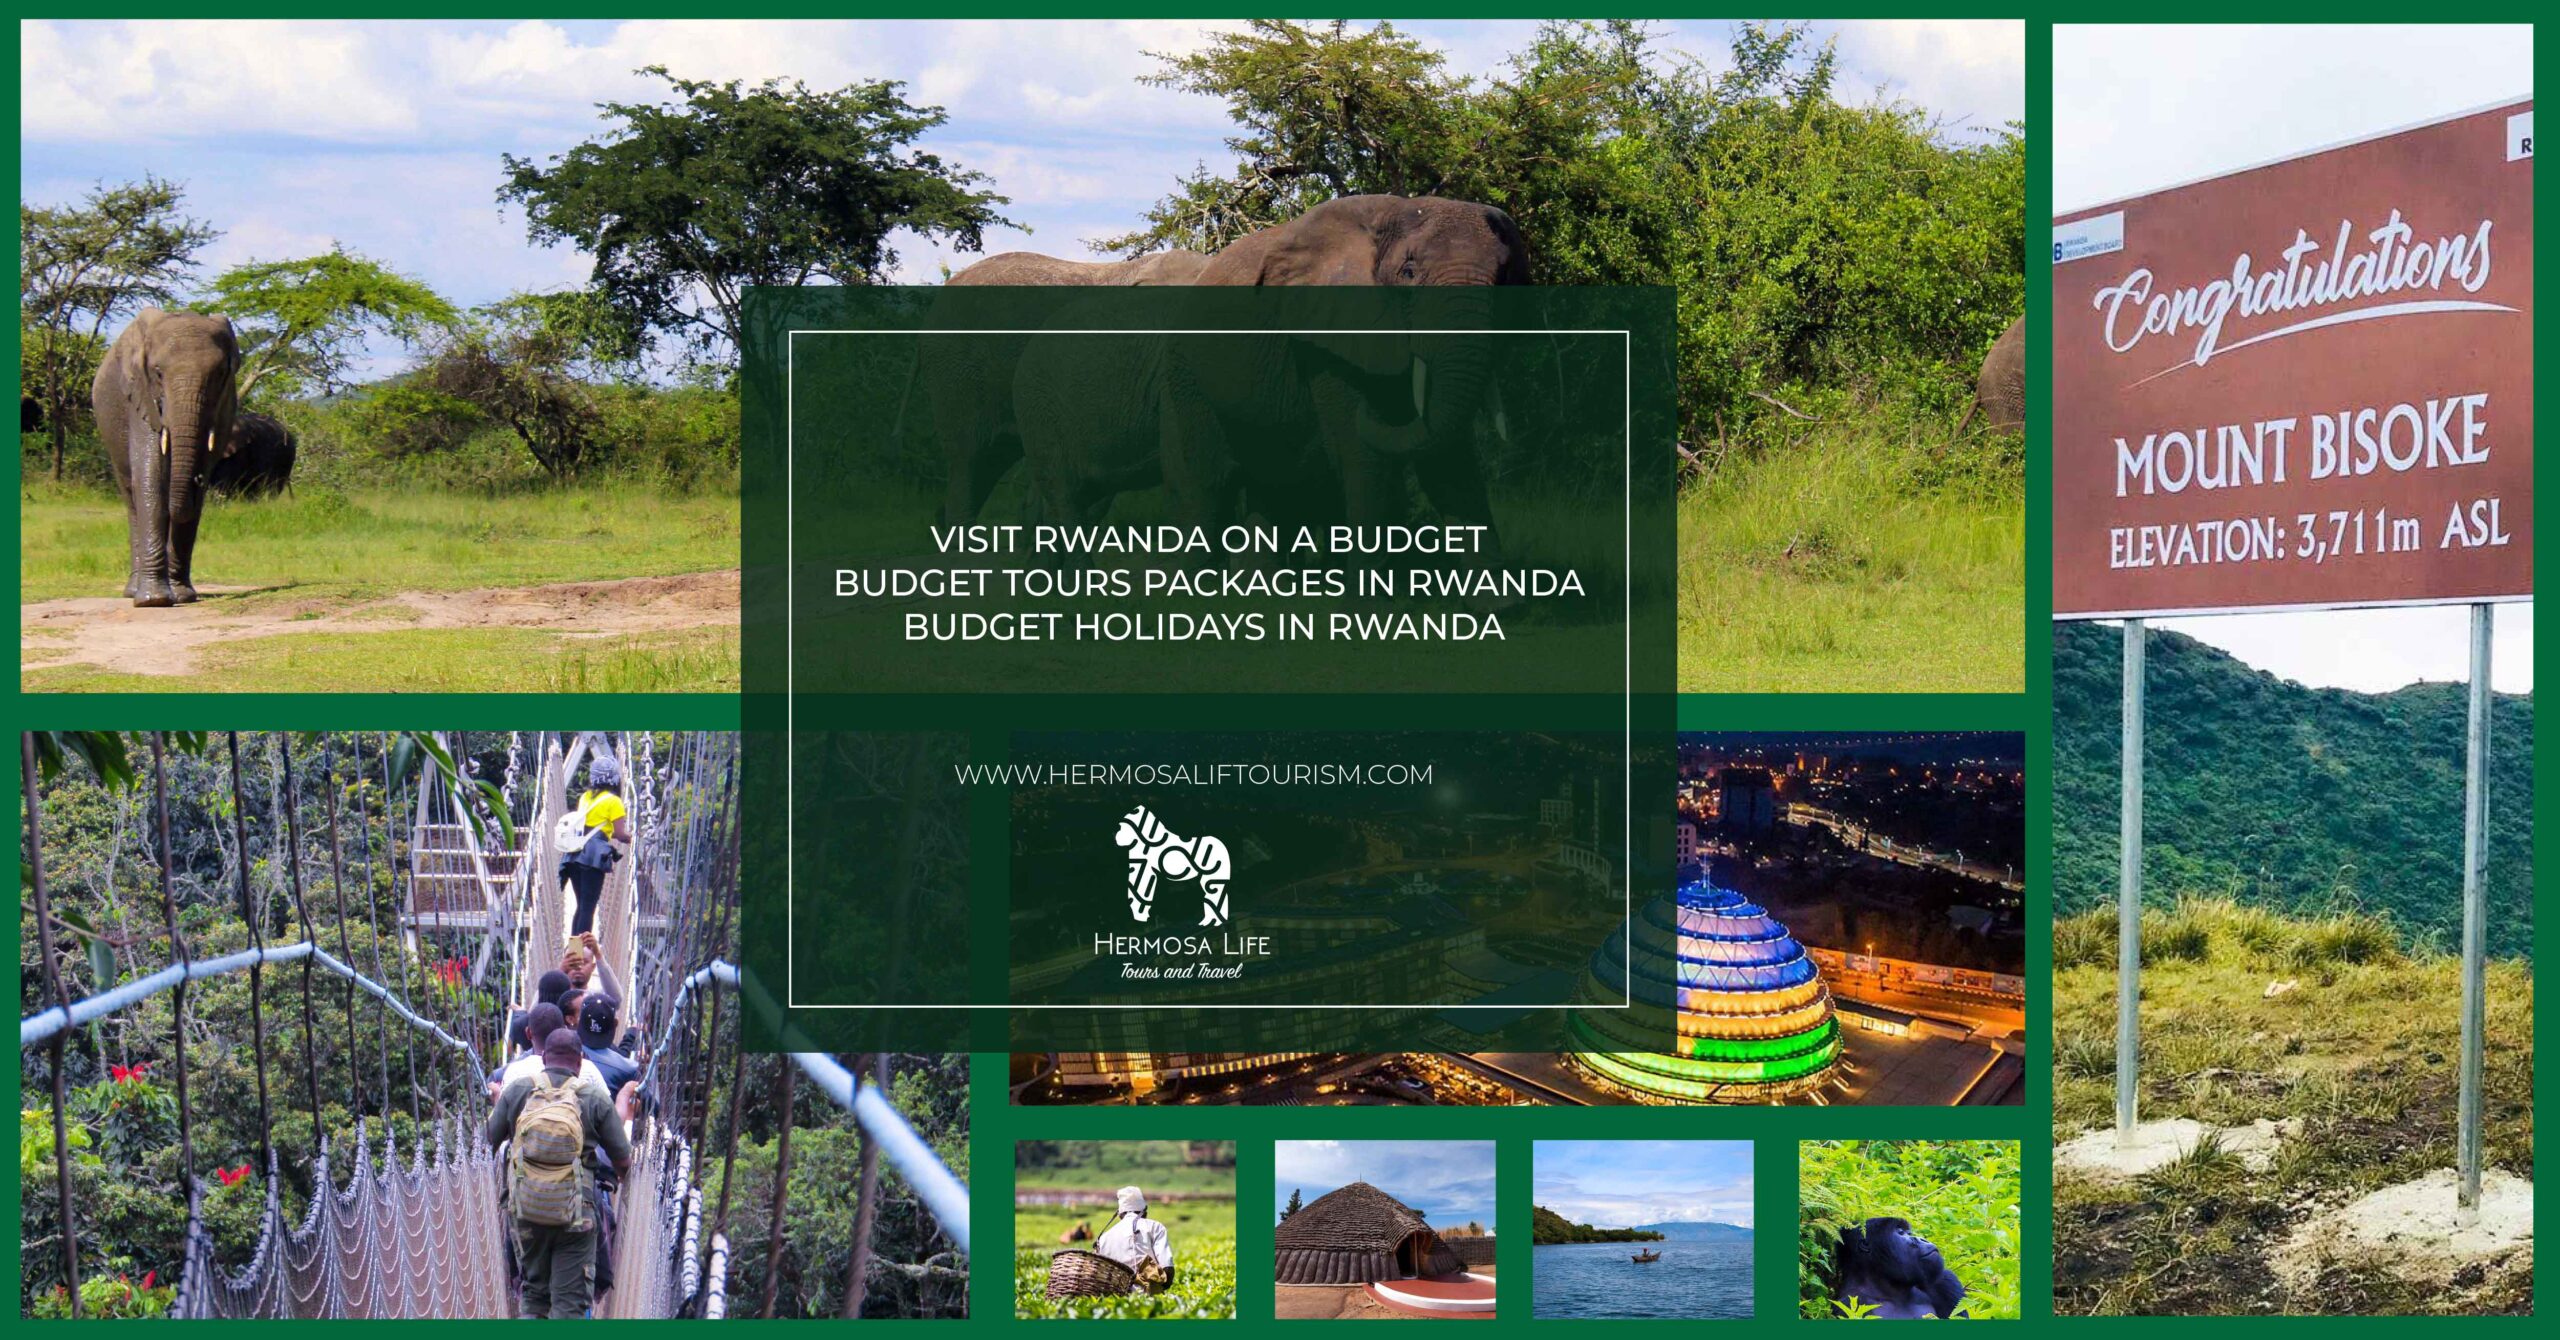 Visit Rwanda on a Budget | Budget Tours Packages in Rwanda | Budget Holidays in Rwanda